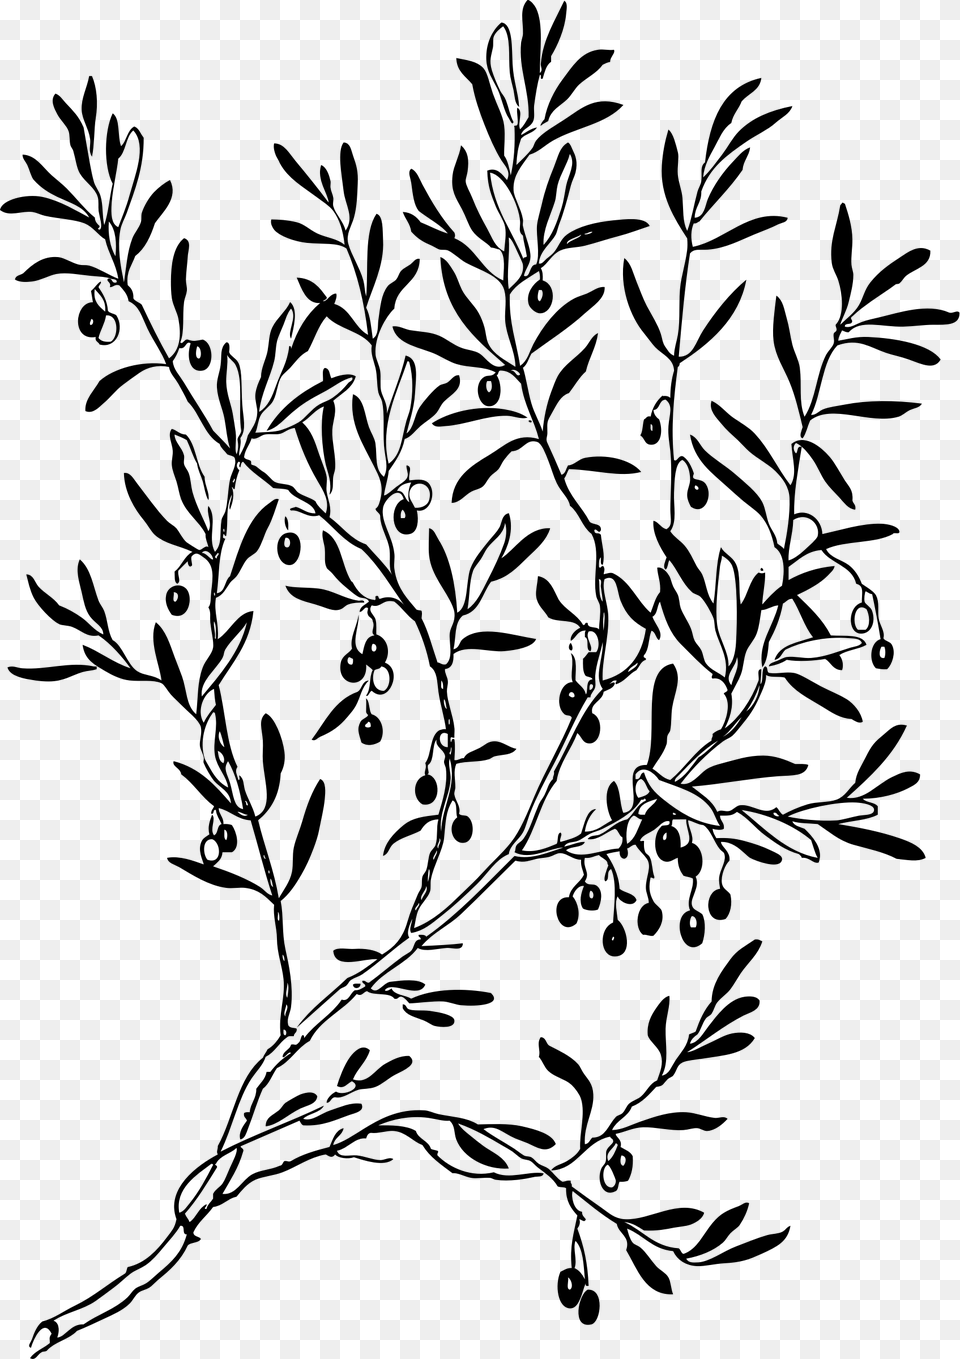 This Icons Design Of Olive Branch, Gray Png